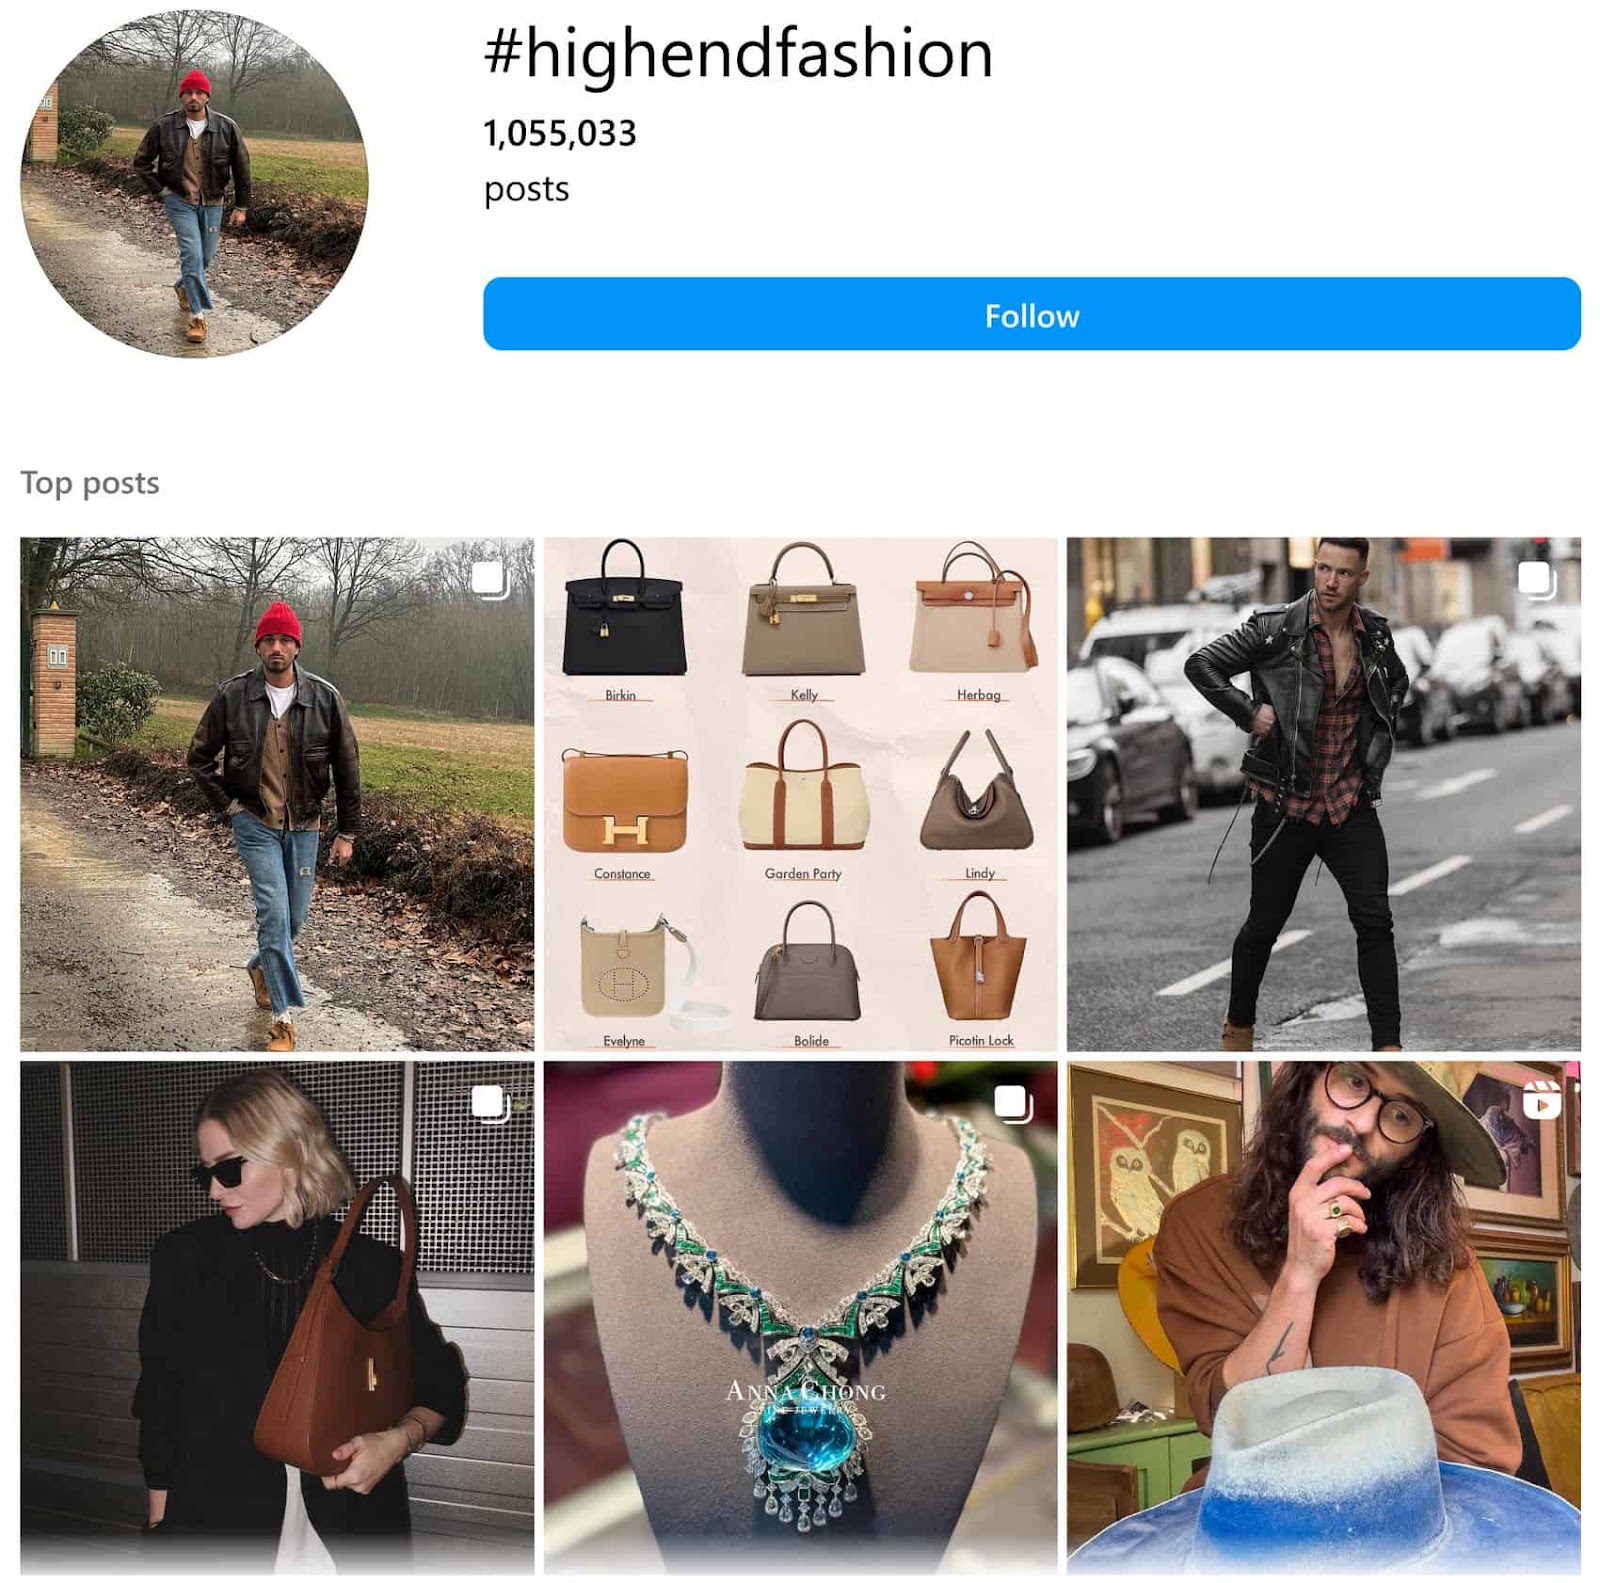 Instagram posts for the topic #HighEndFashion